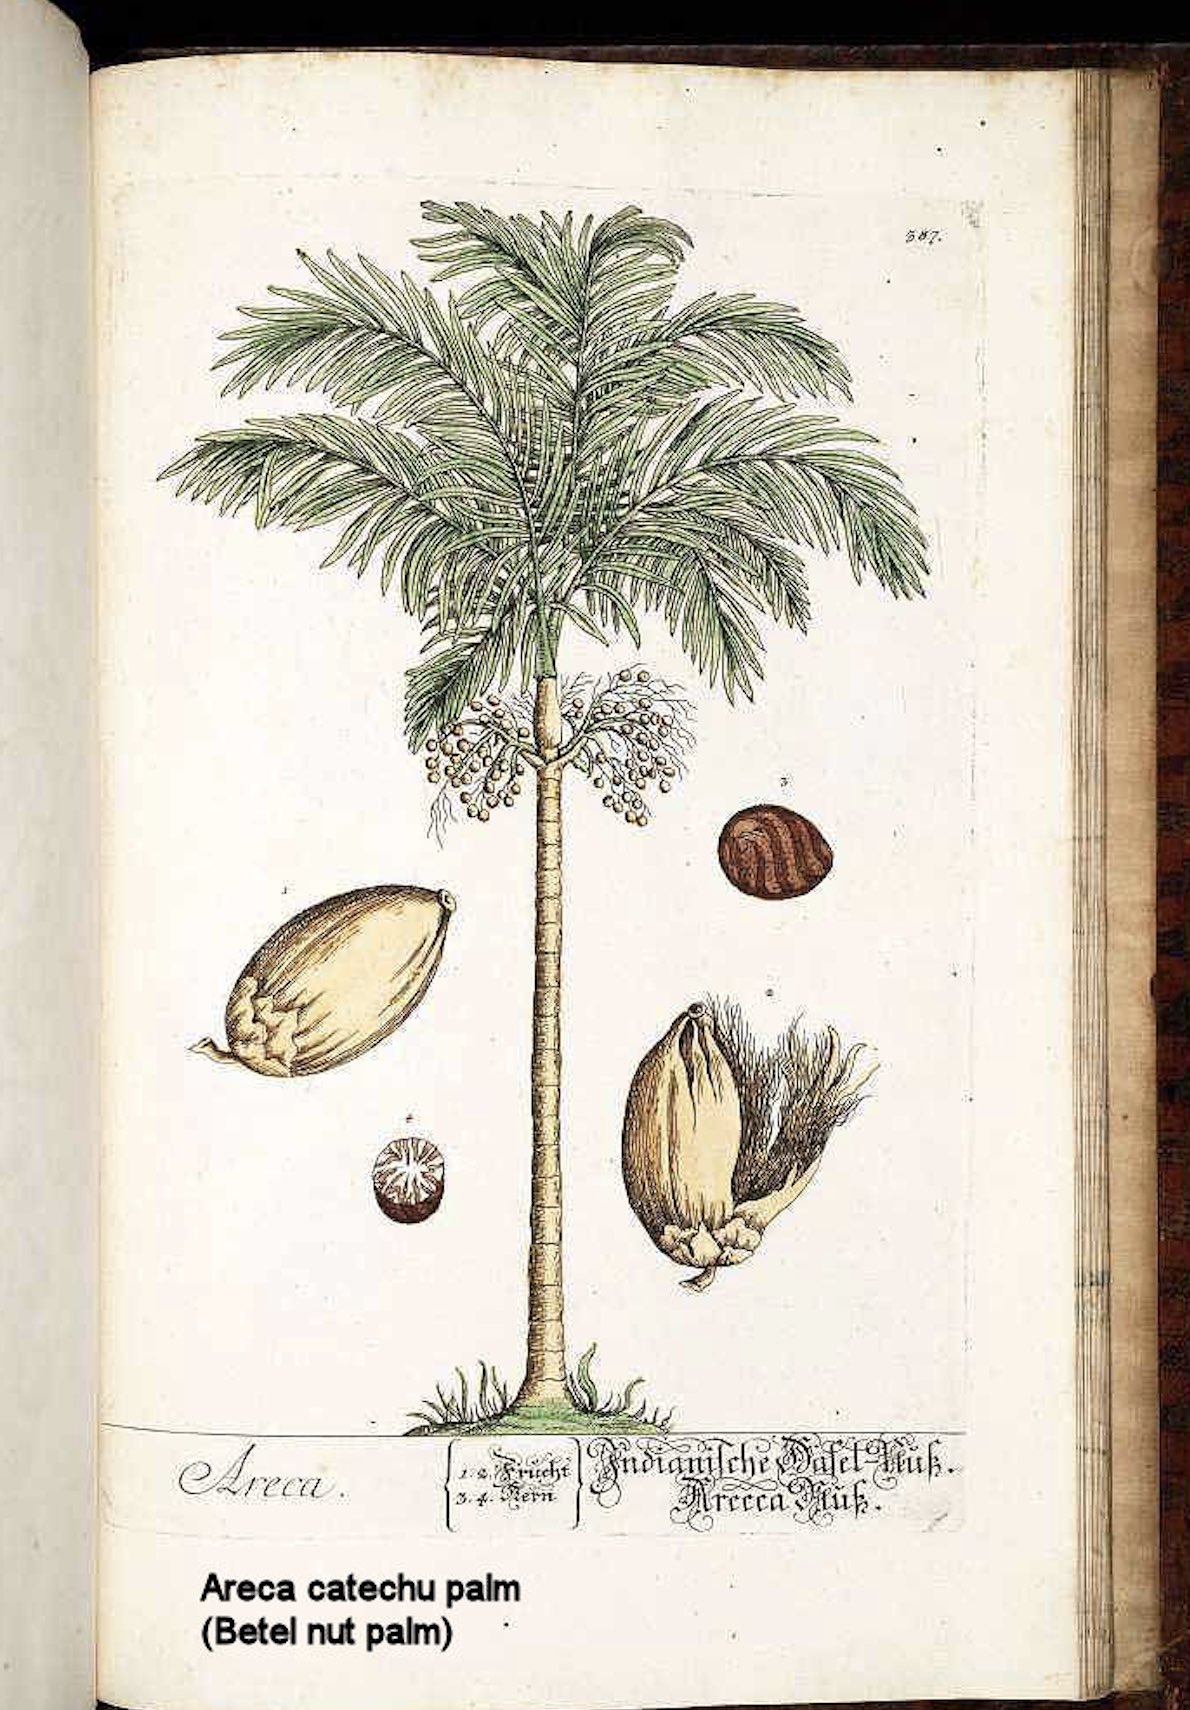 a book opened to a page showing a drawing of a palm tree and nut. words Areca catechu palm (Betel nut palm)